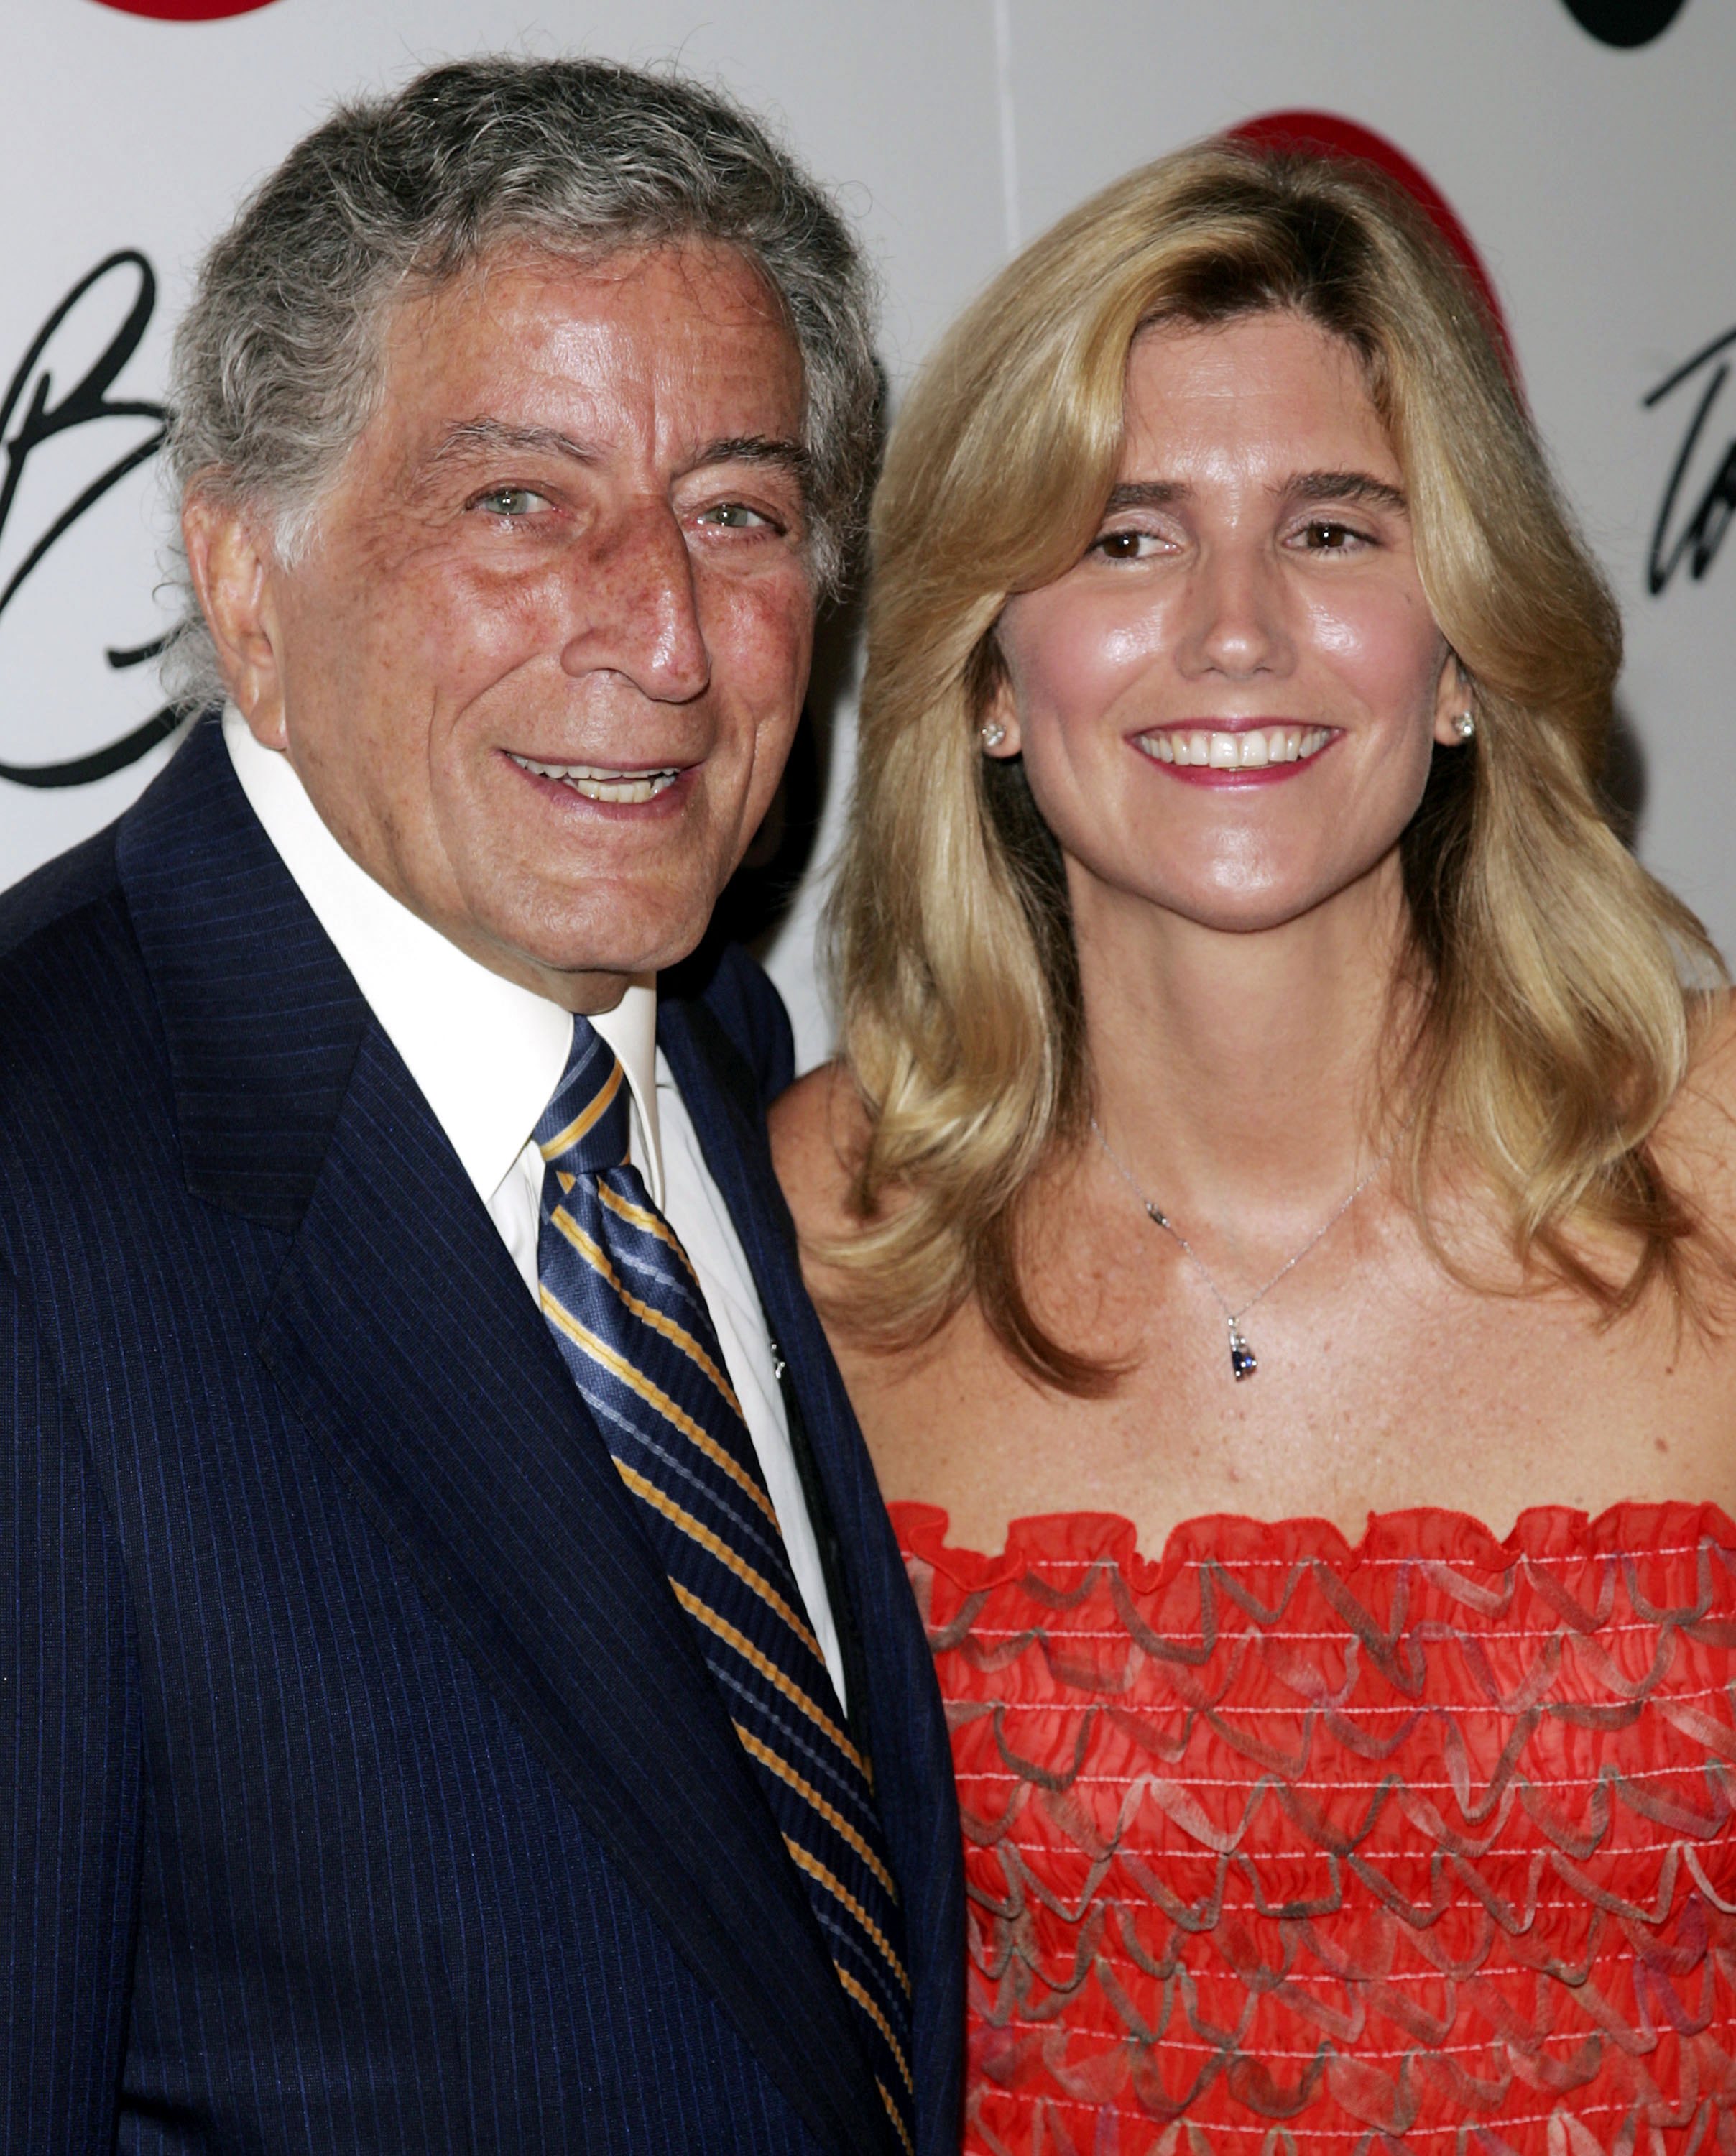 Tony Bennett and wife Susan Benedetto in 2006